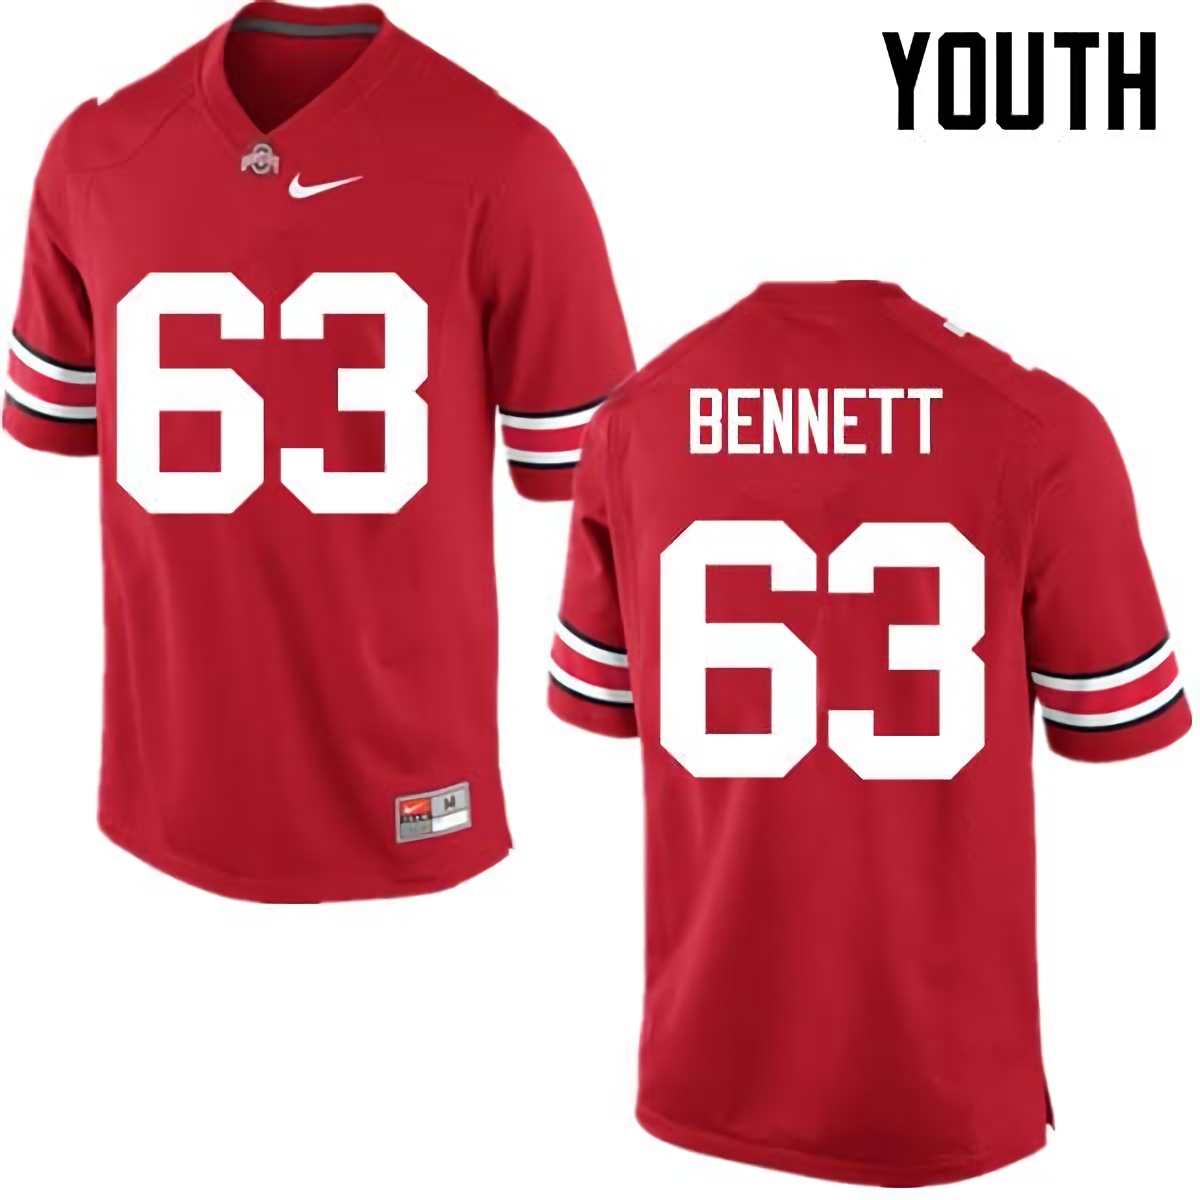 Michael Bennett Ohio State Buckeyes Youth NCAA #63 Nike Red College Stitched Football Jersey QBN4556PQ